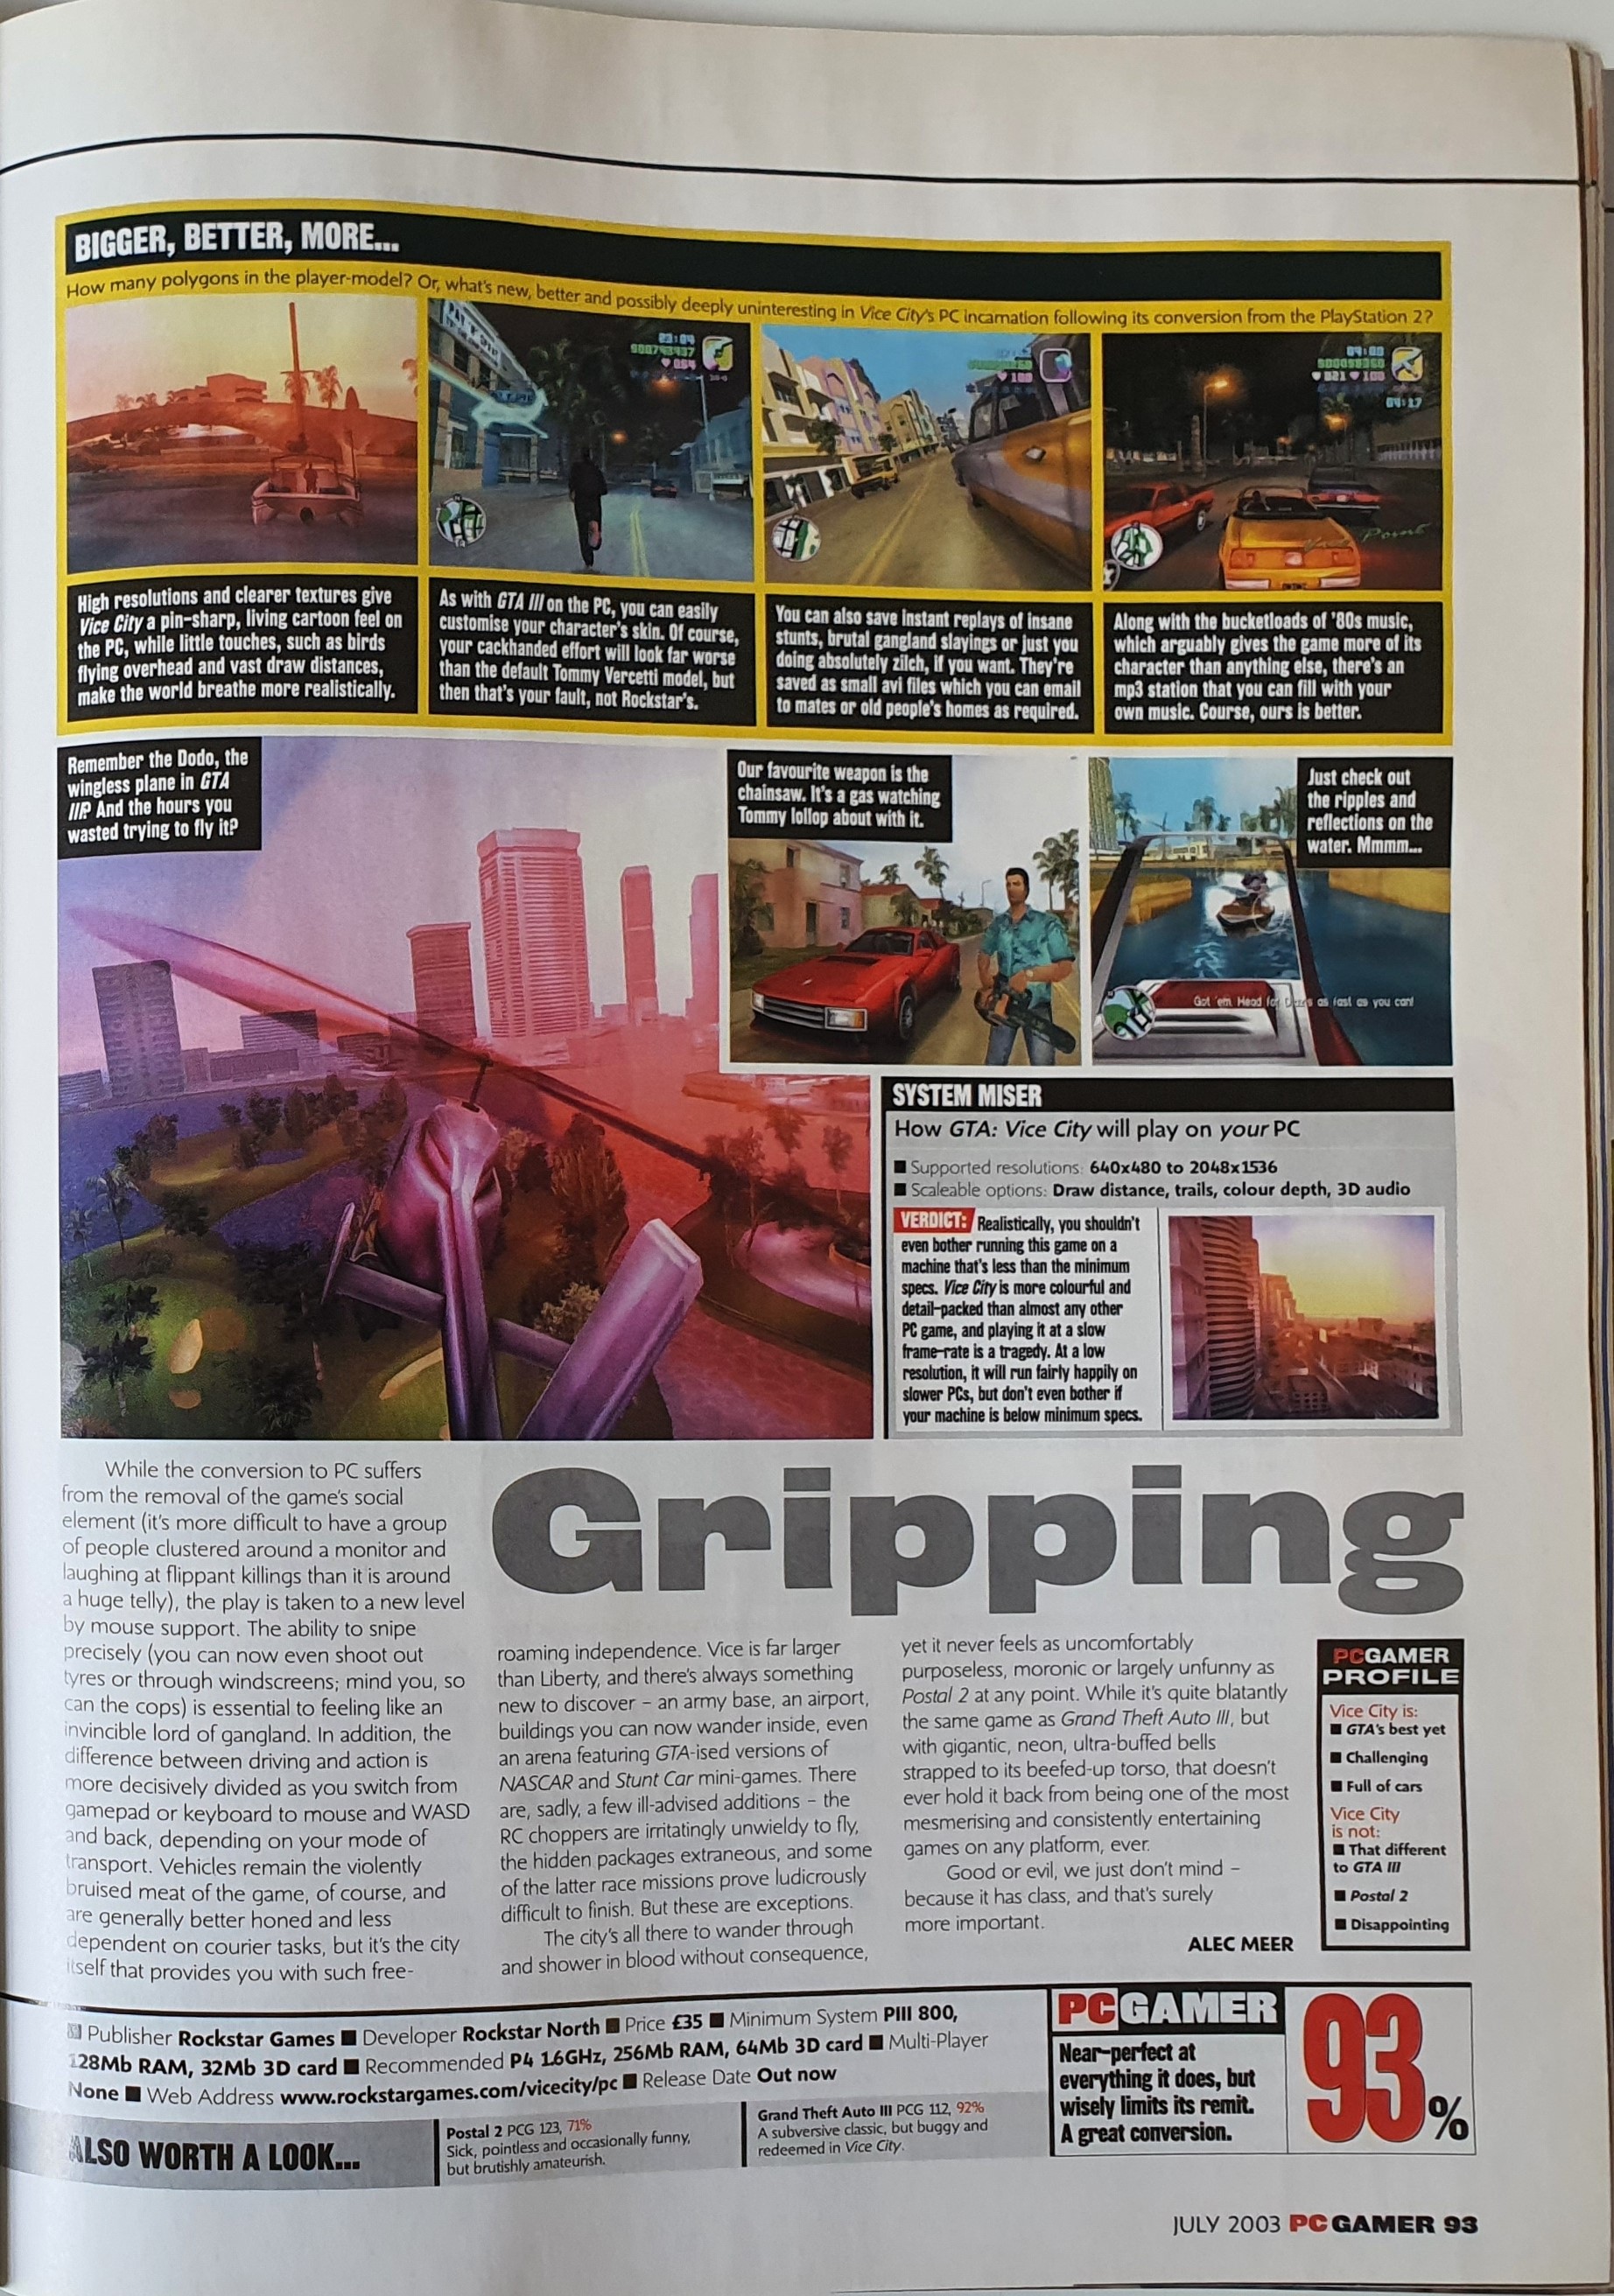 Vice City review, 2003